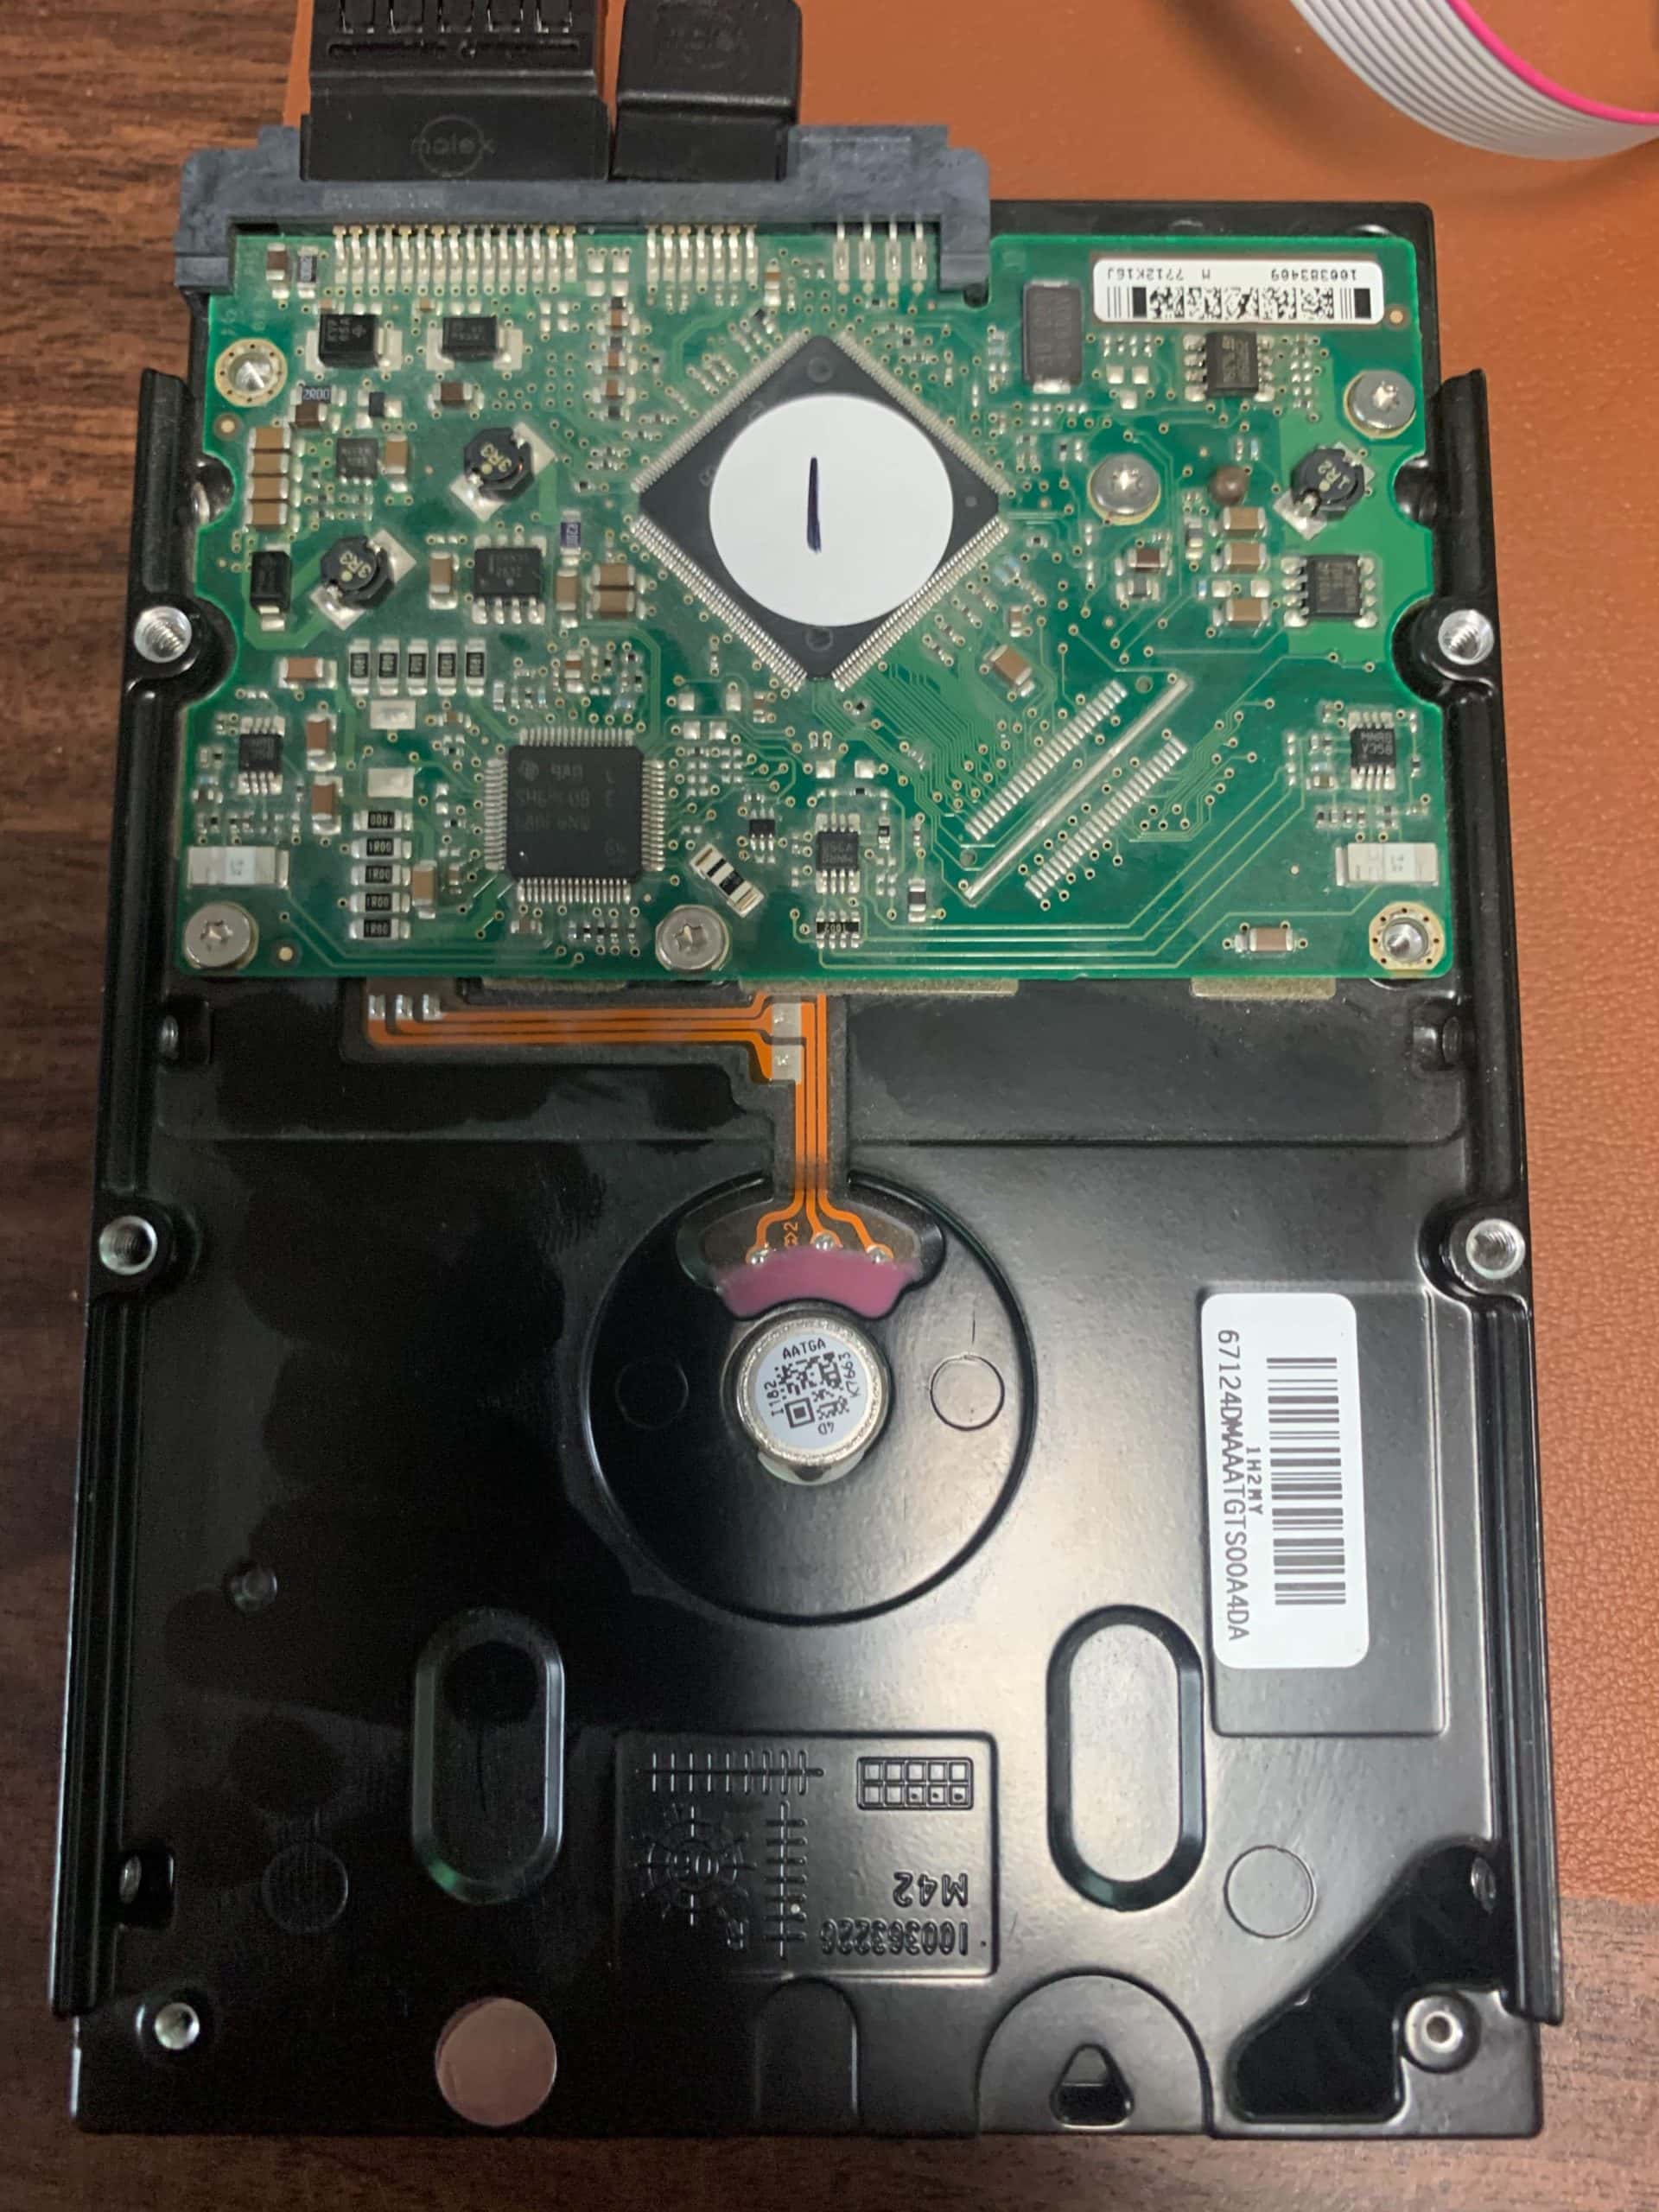 Seagate ST3500641AS 500GB